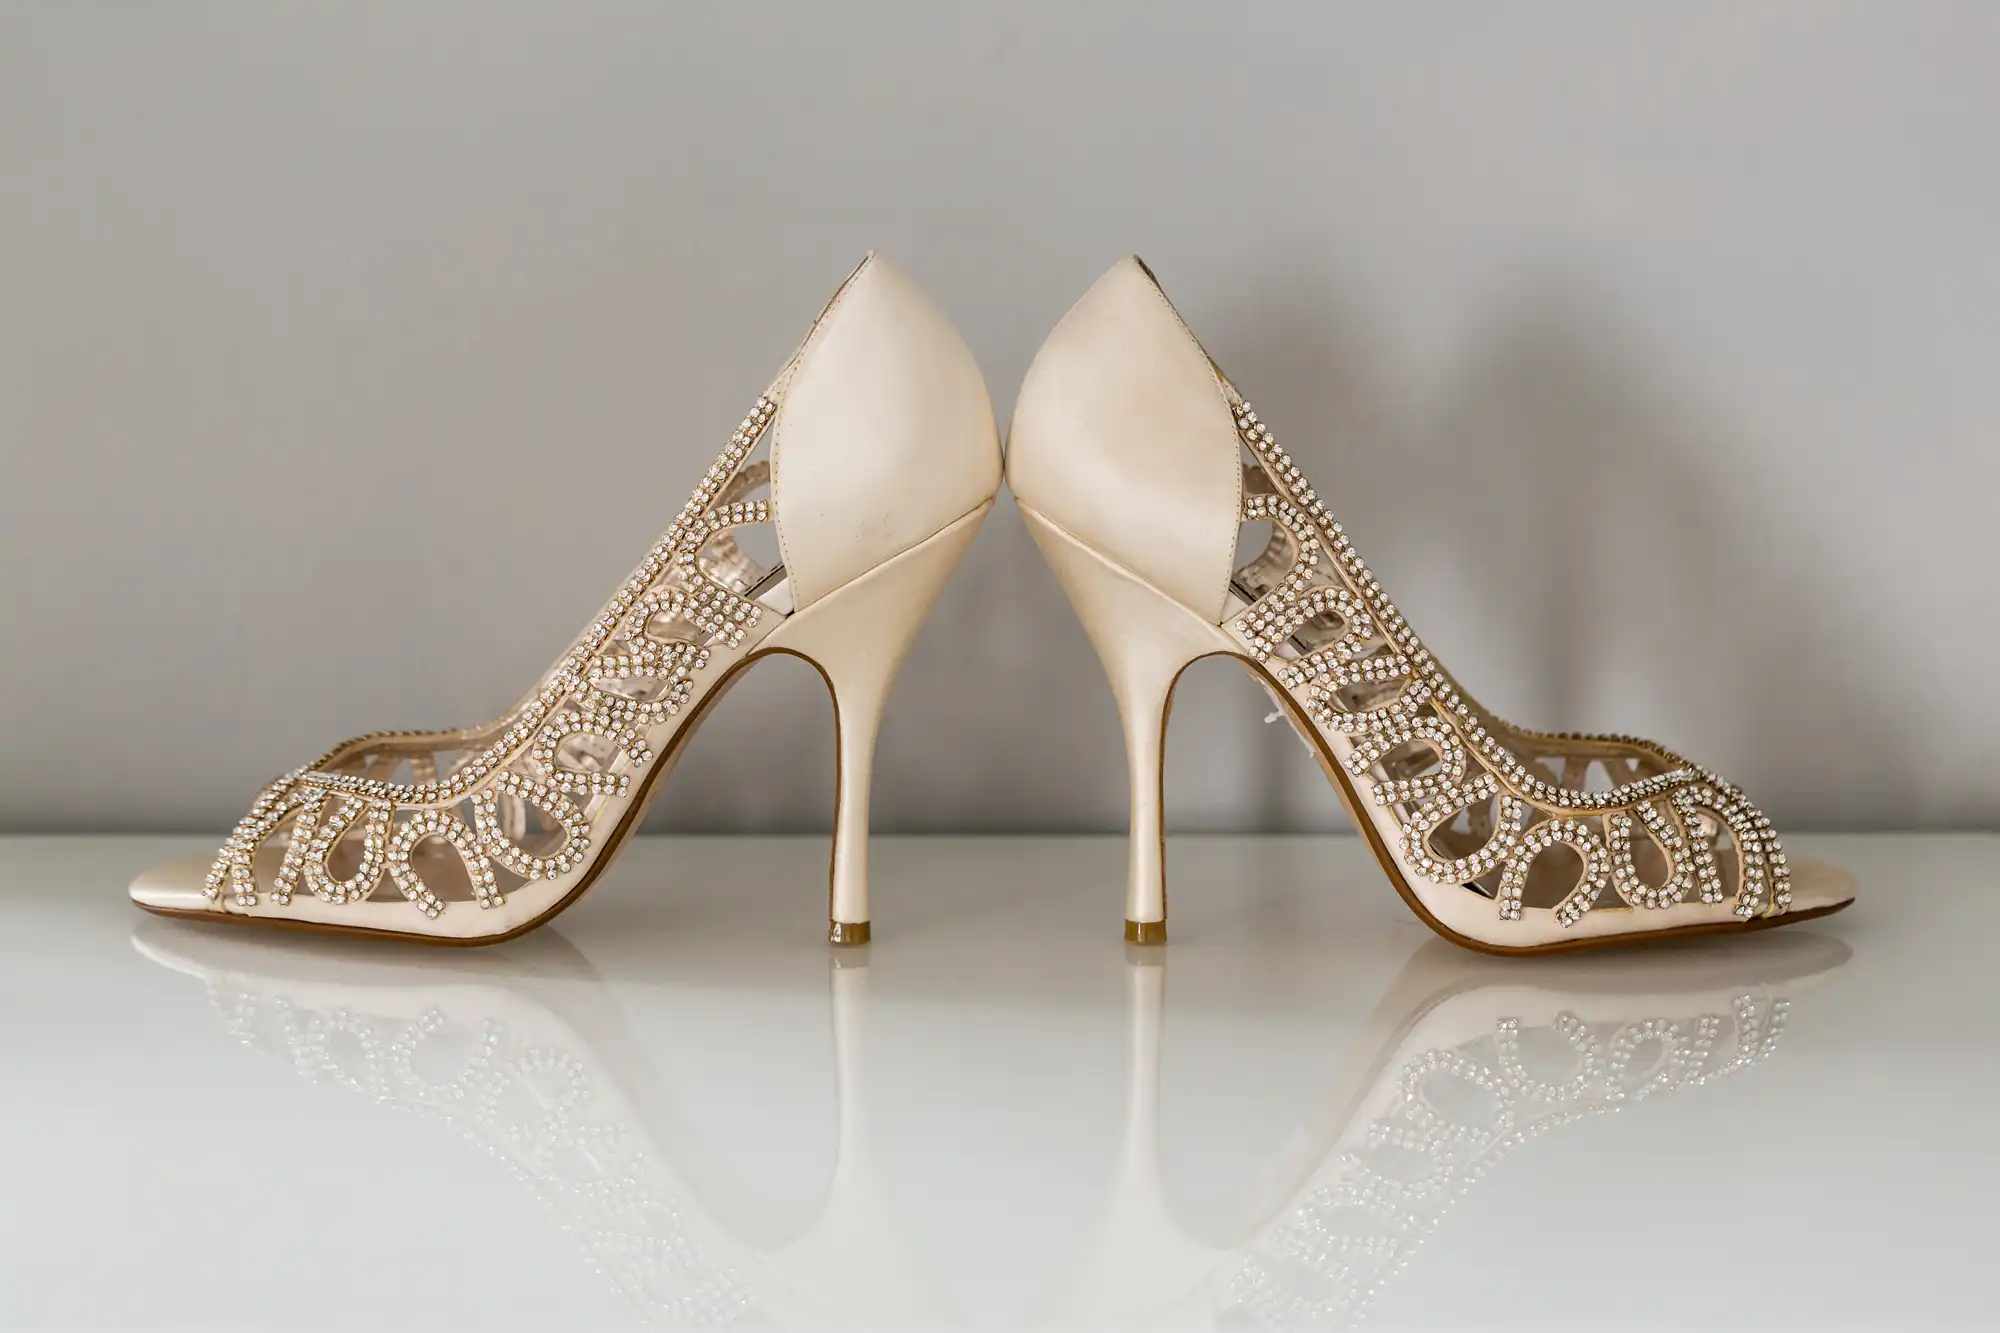 A pair of elegant beige high-heeled shoes with intricate golden embellishments, displayed on a reflective surface.